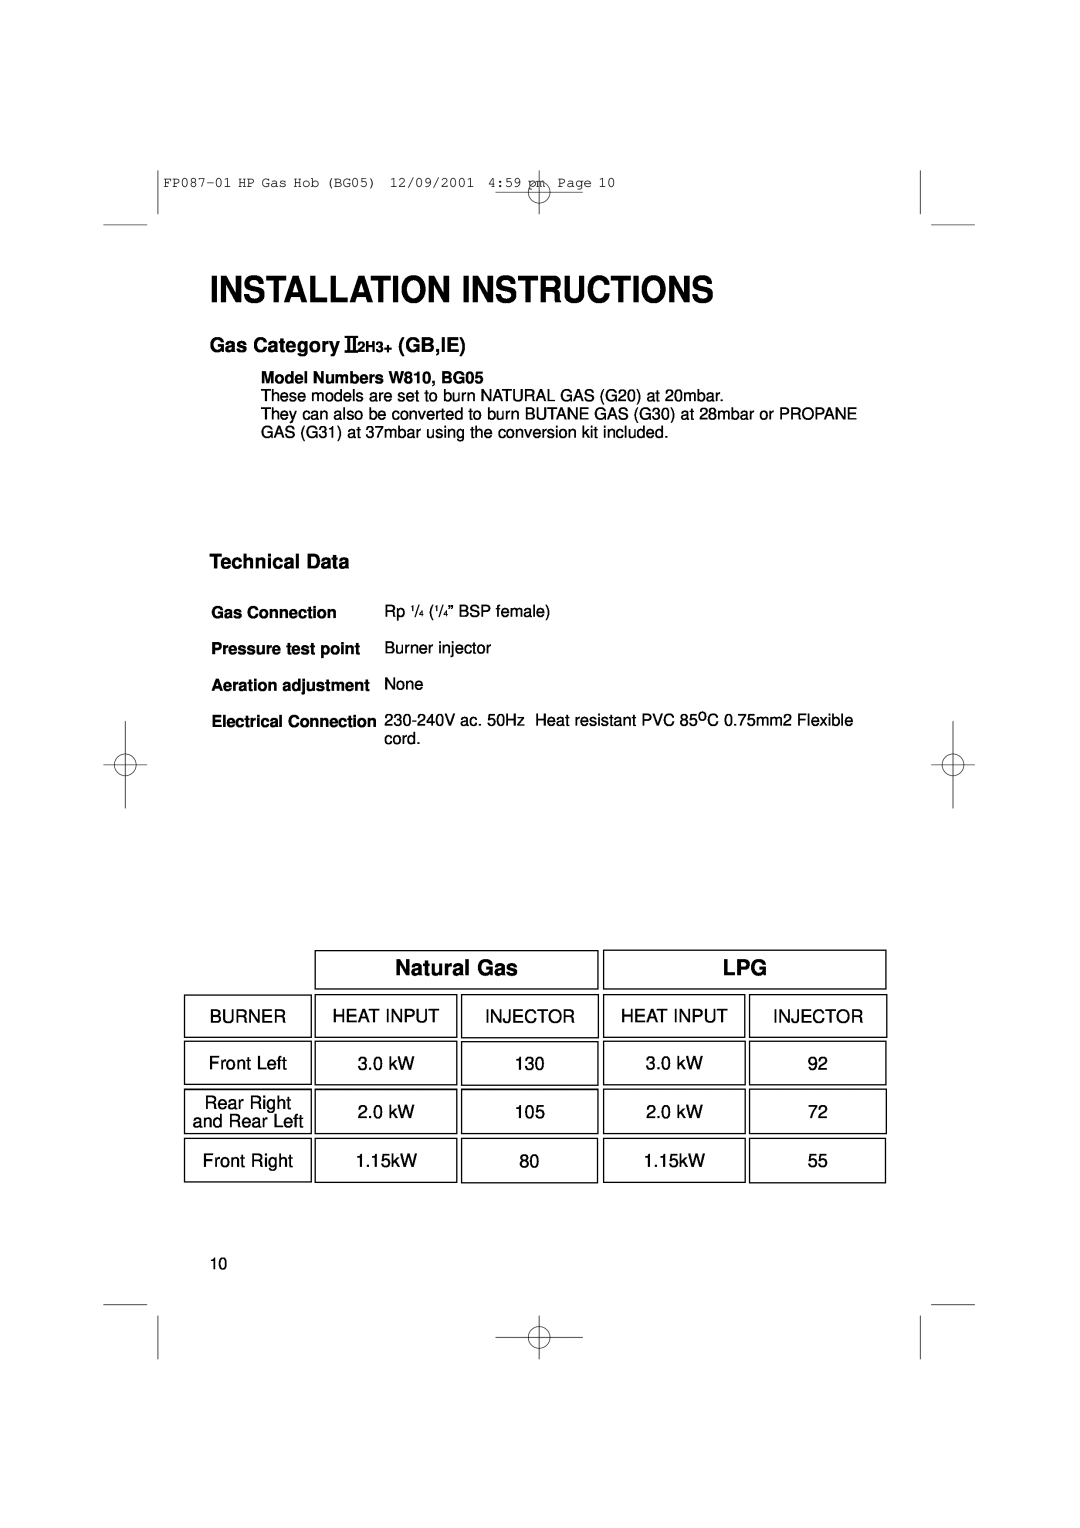 Hotpoint Installation Instructions, Natural Gas, Gas Category II2H3+ GB,IE, Technical Data, Model Numbers W810, BG05 